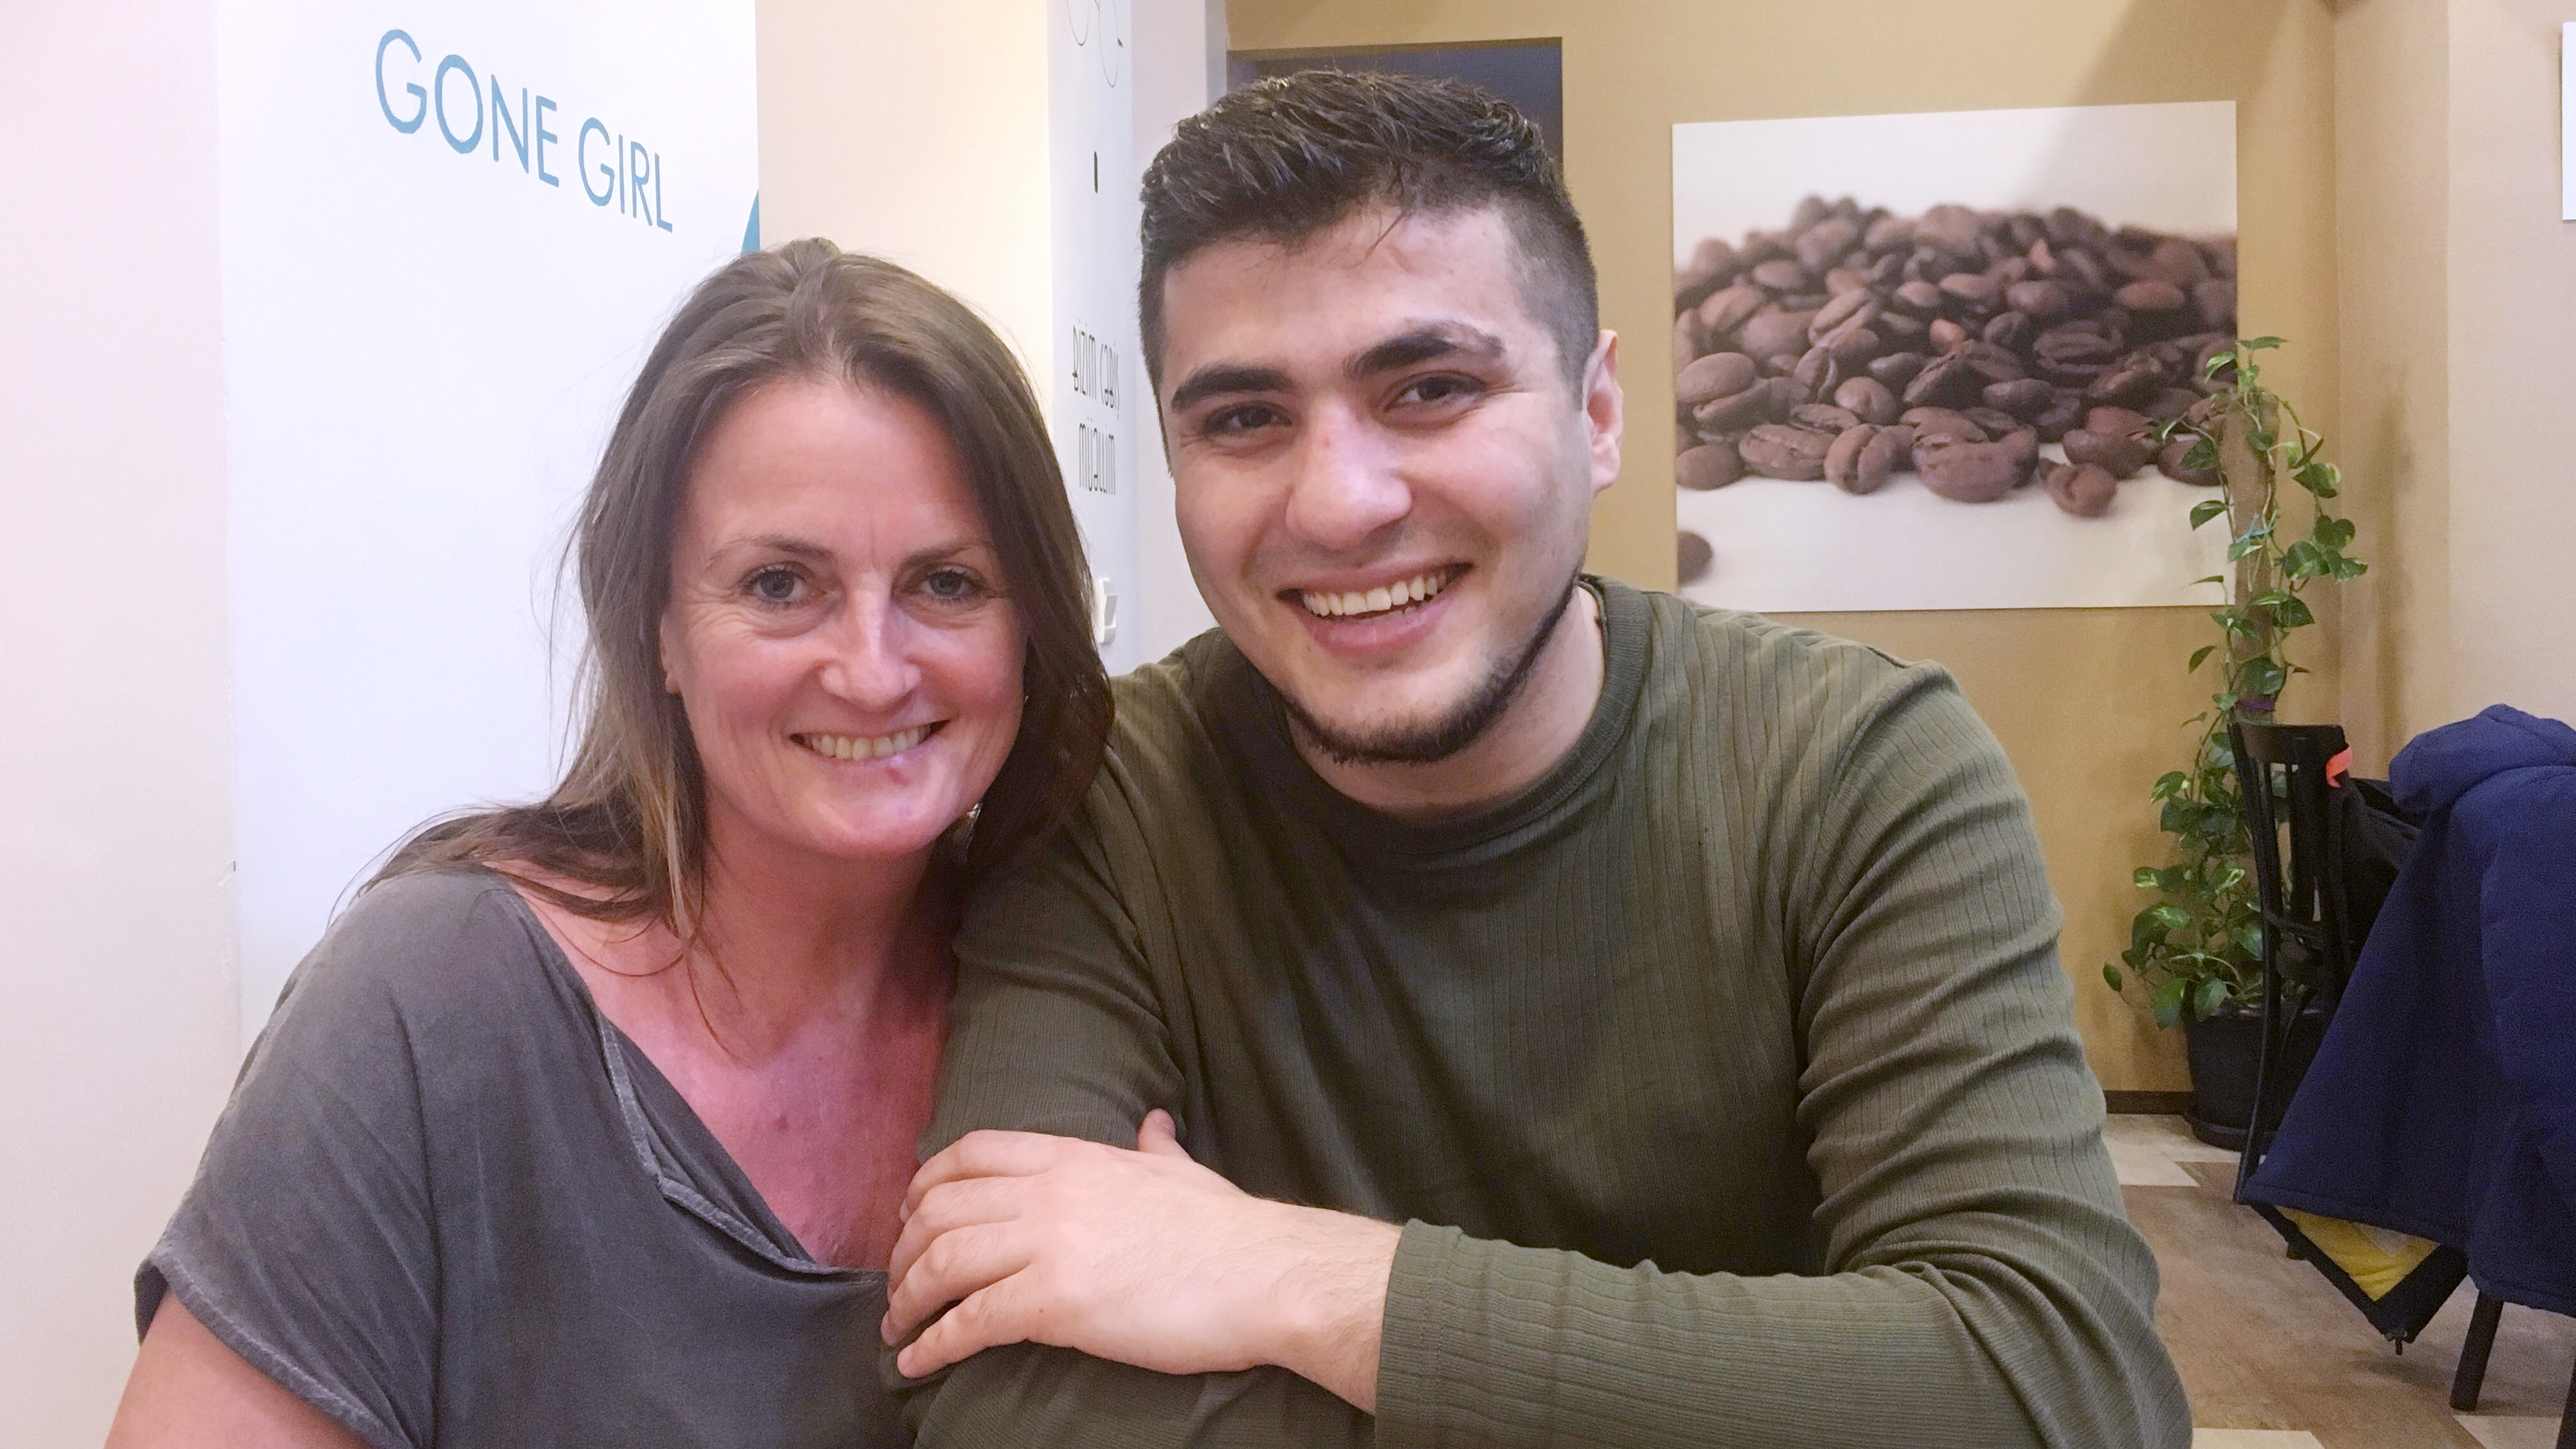 HRHF's Director Maria Dahle meets with Mehman Huseynov in Baku following his release from prison. Photo: HRHF, 13 March 2019.